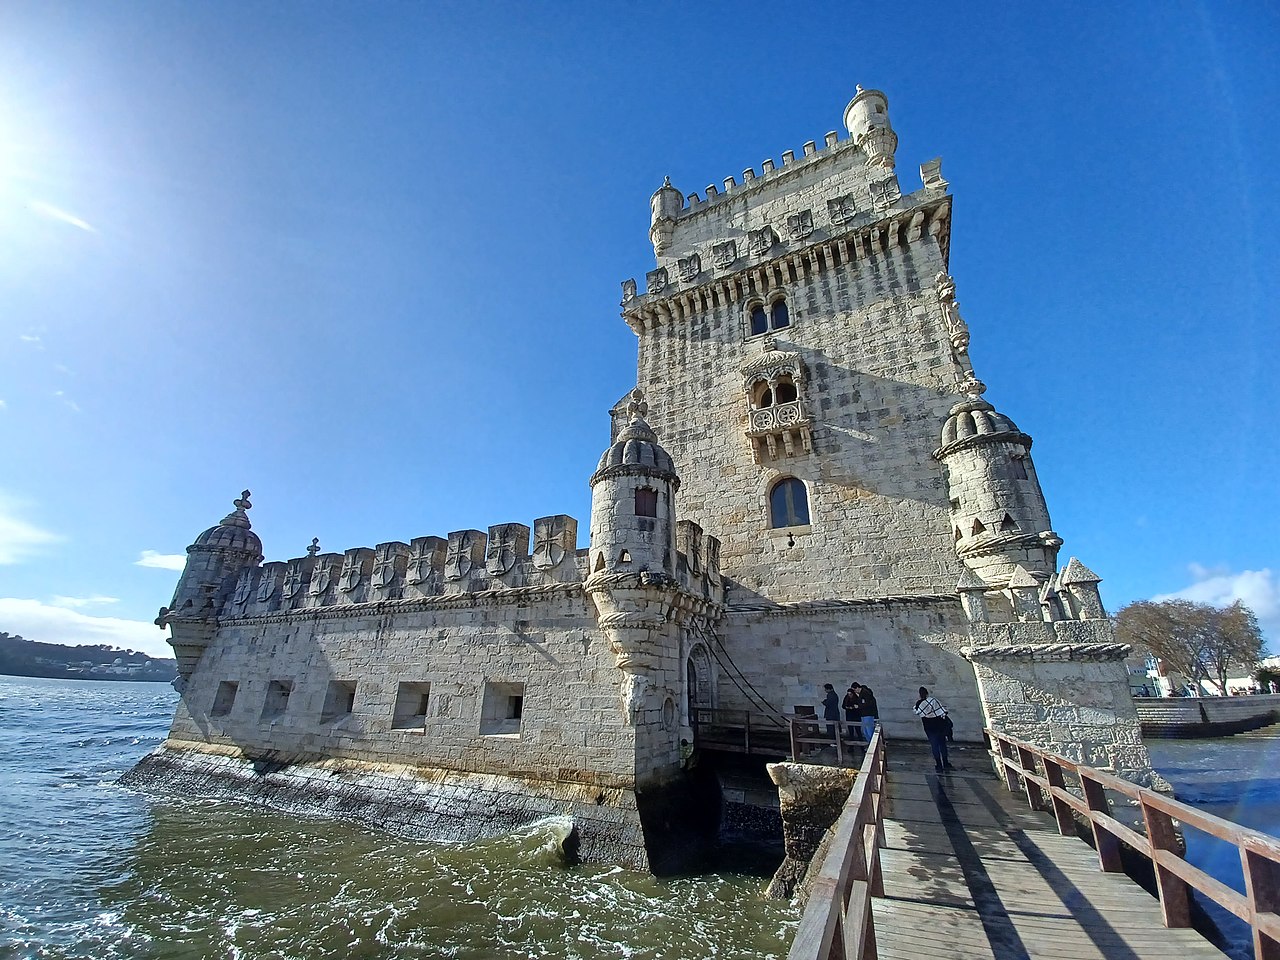 Designed by military architect Francisco de Arruda, the tower served as a fortress and ceremonial gateway to Lisbon. With its strategic two-floor firing positions and intricate decorations, it marked a milestone in military architecture.